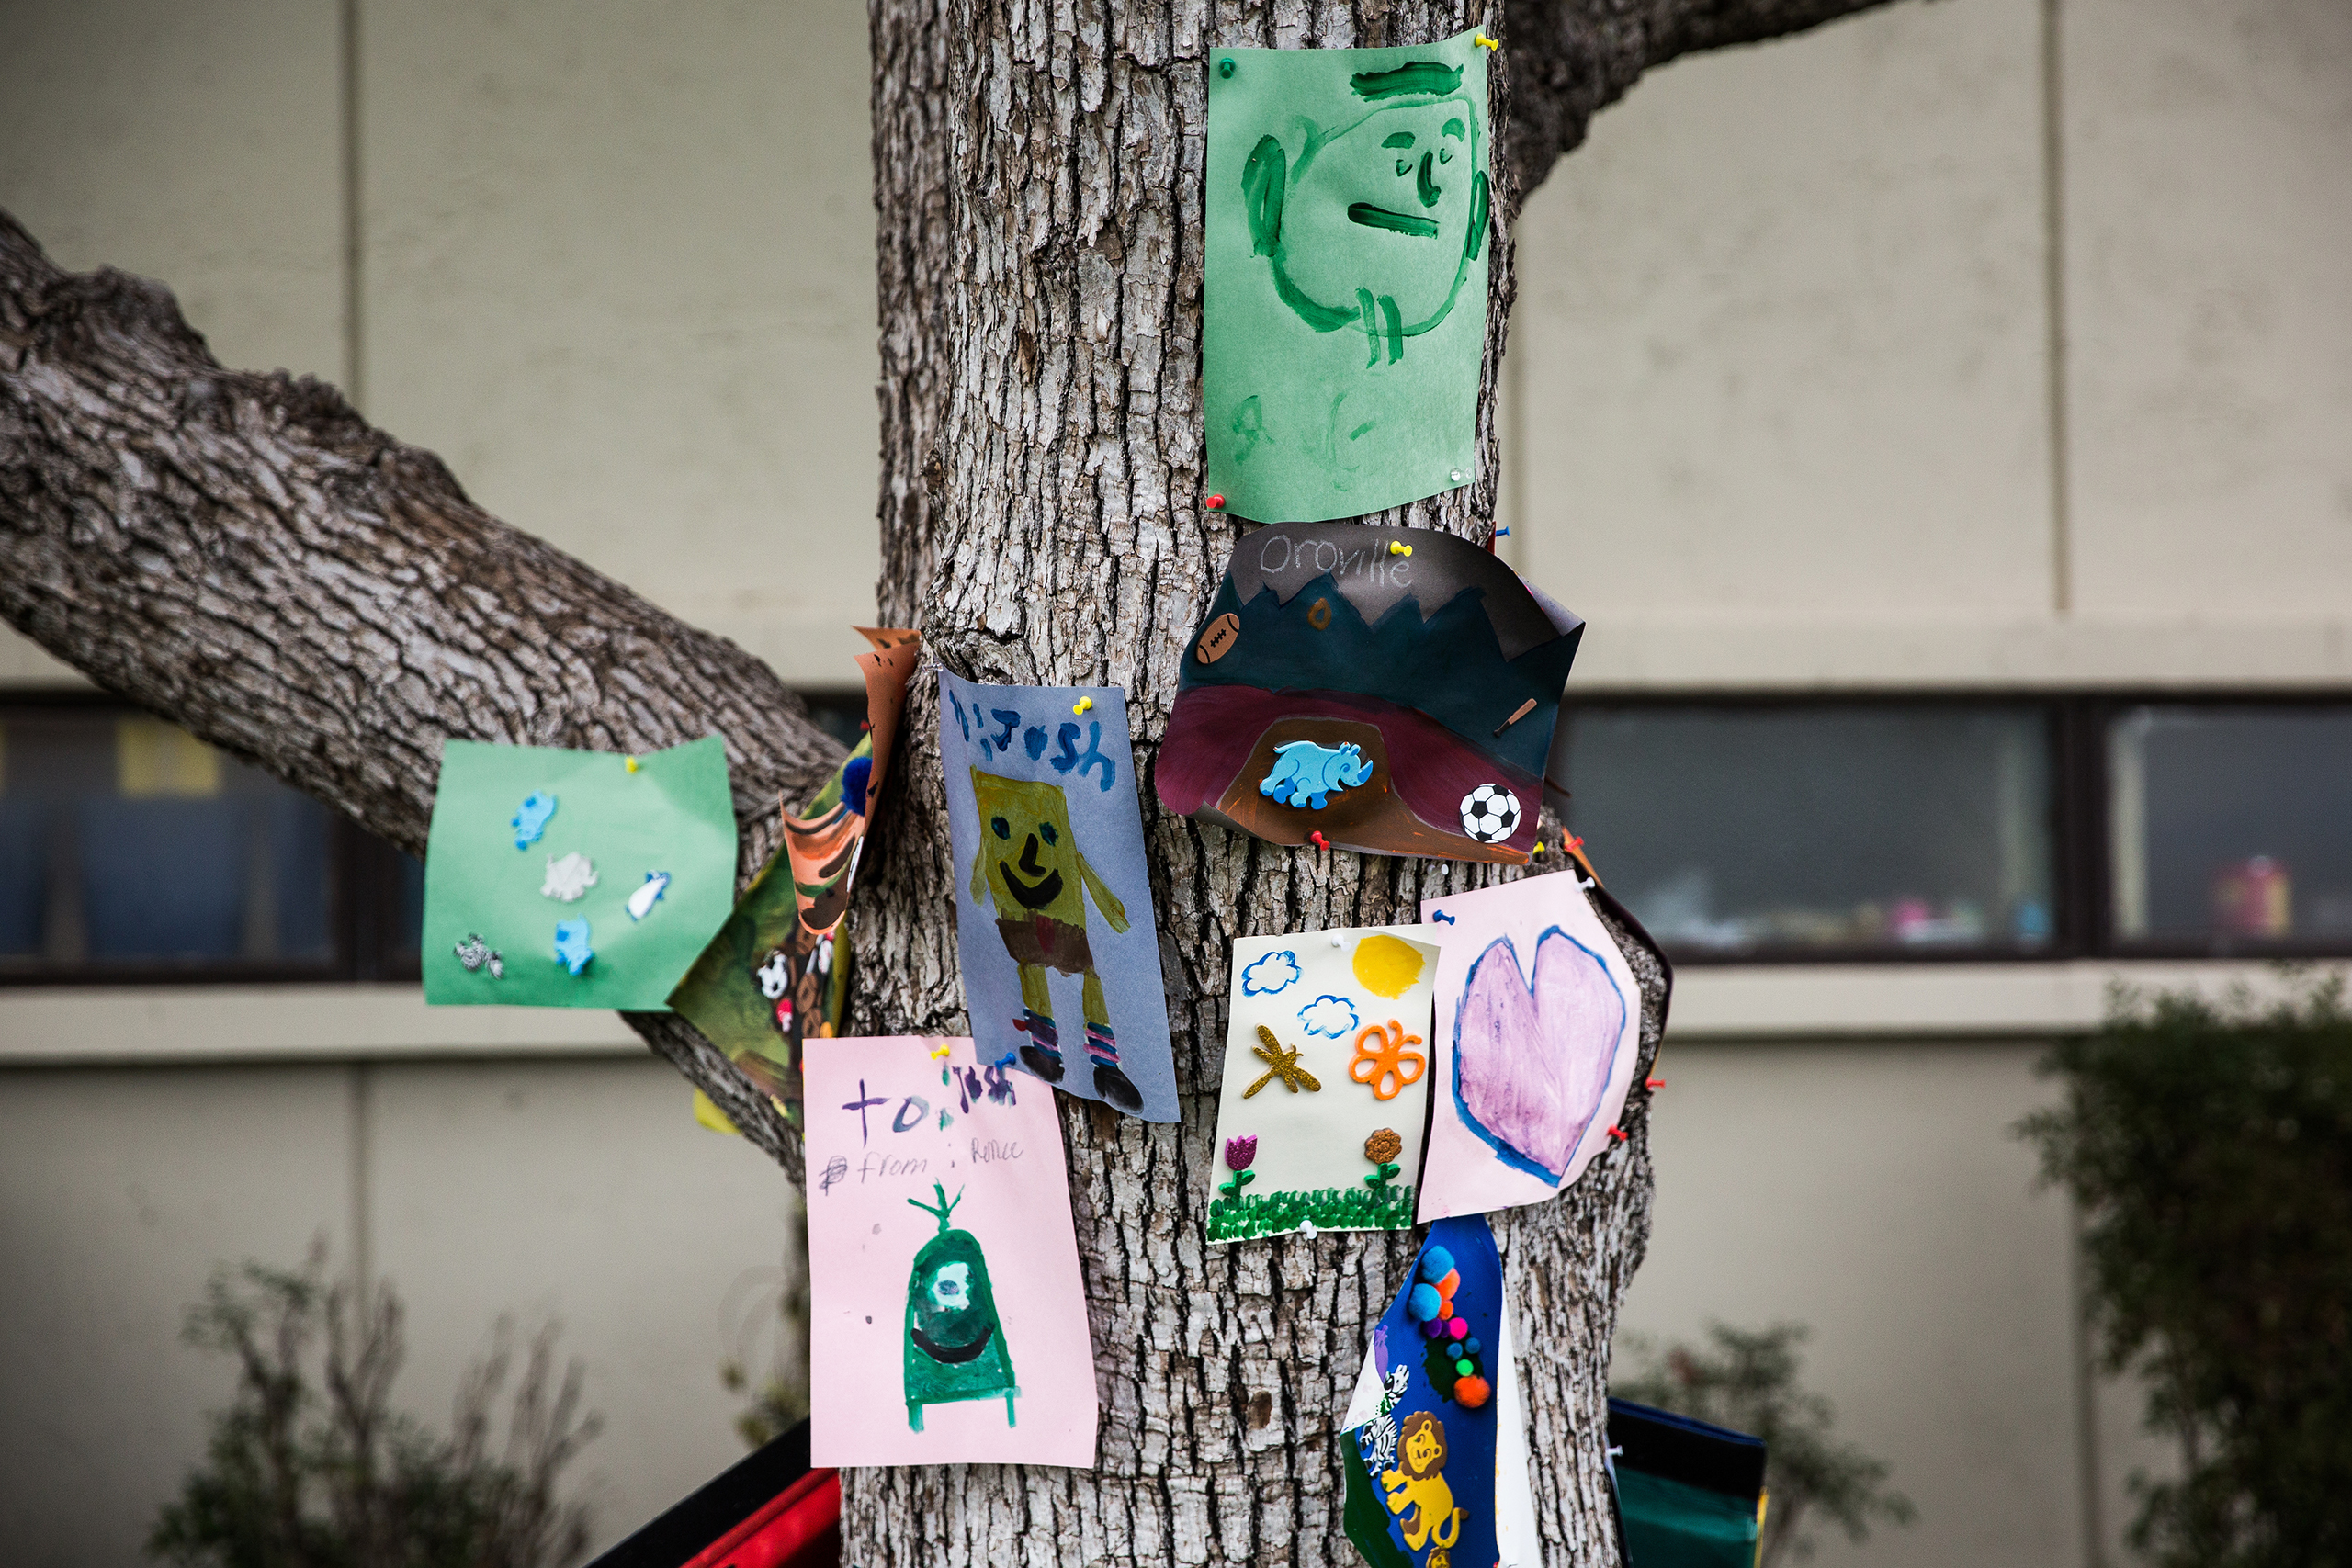 Children's artwork hangs on a tree at the evacuation center at the Butte County Fairgrounds in Chico, Calif., on Feb. 15, 2017.